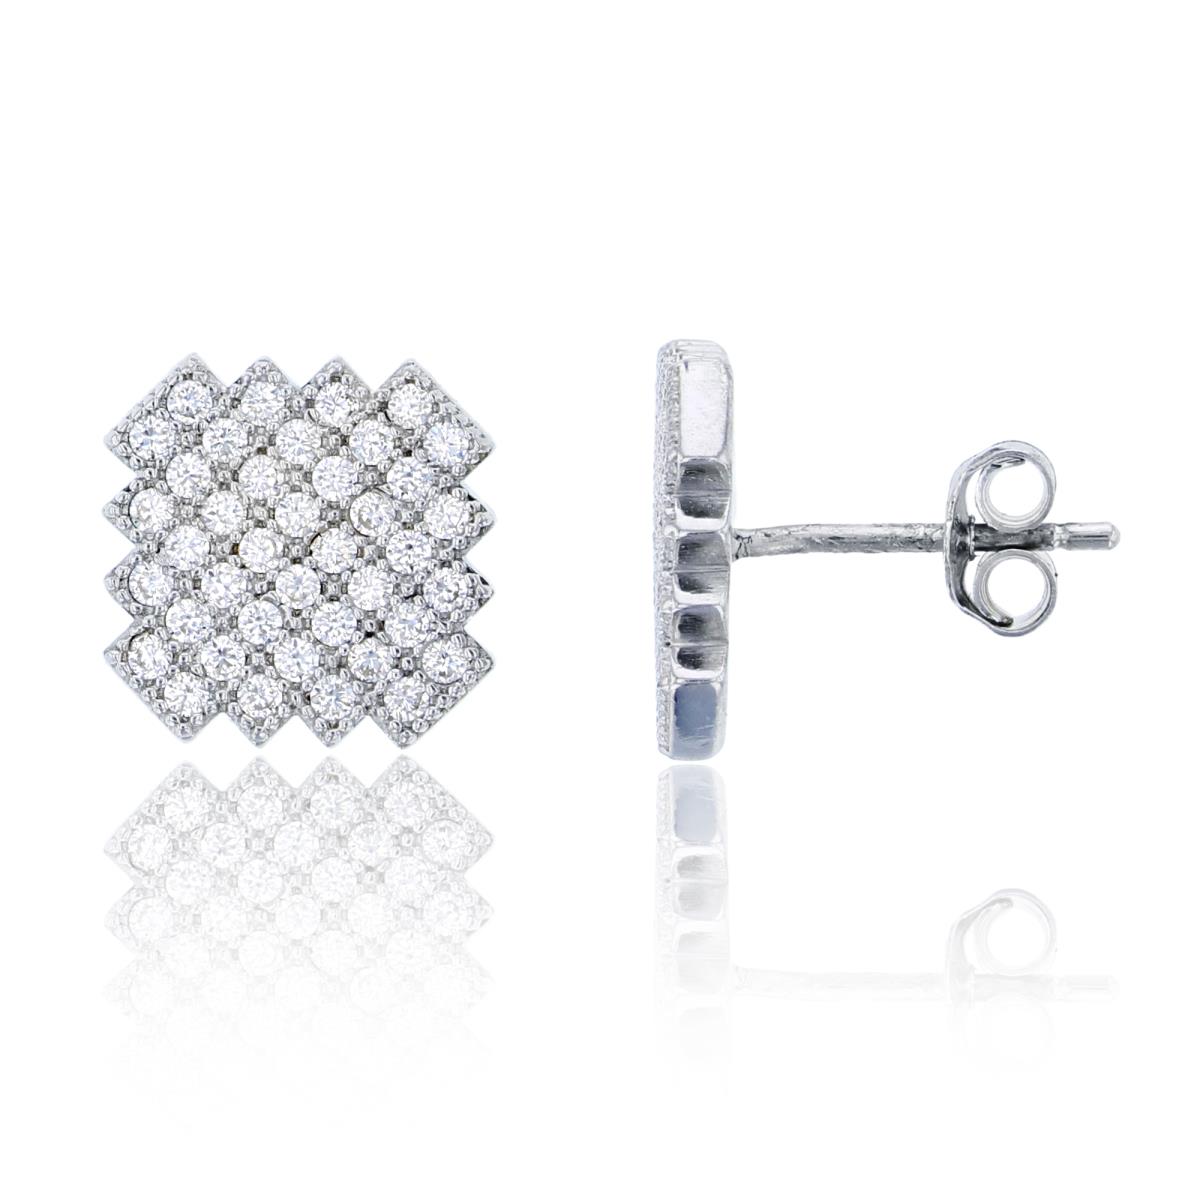 Sterling Silver 12x12mm Crincked Square Pave Stud Earring